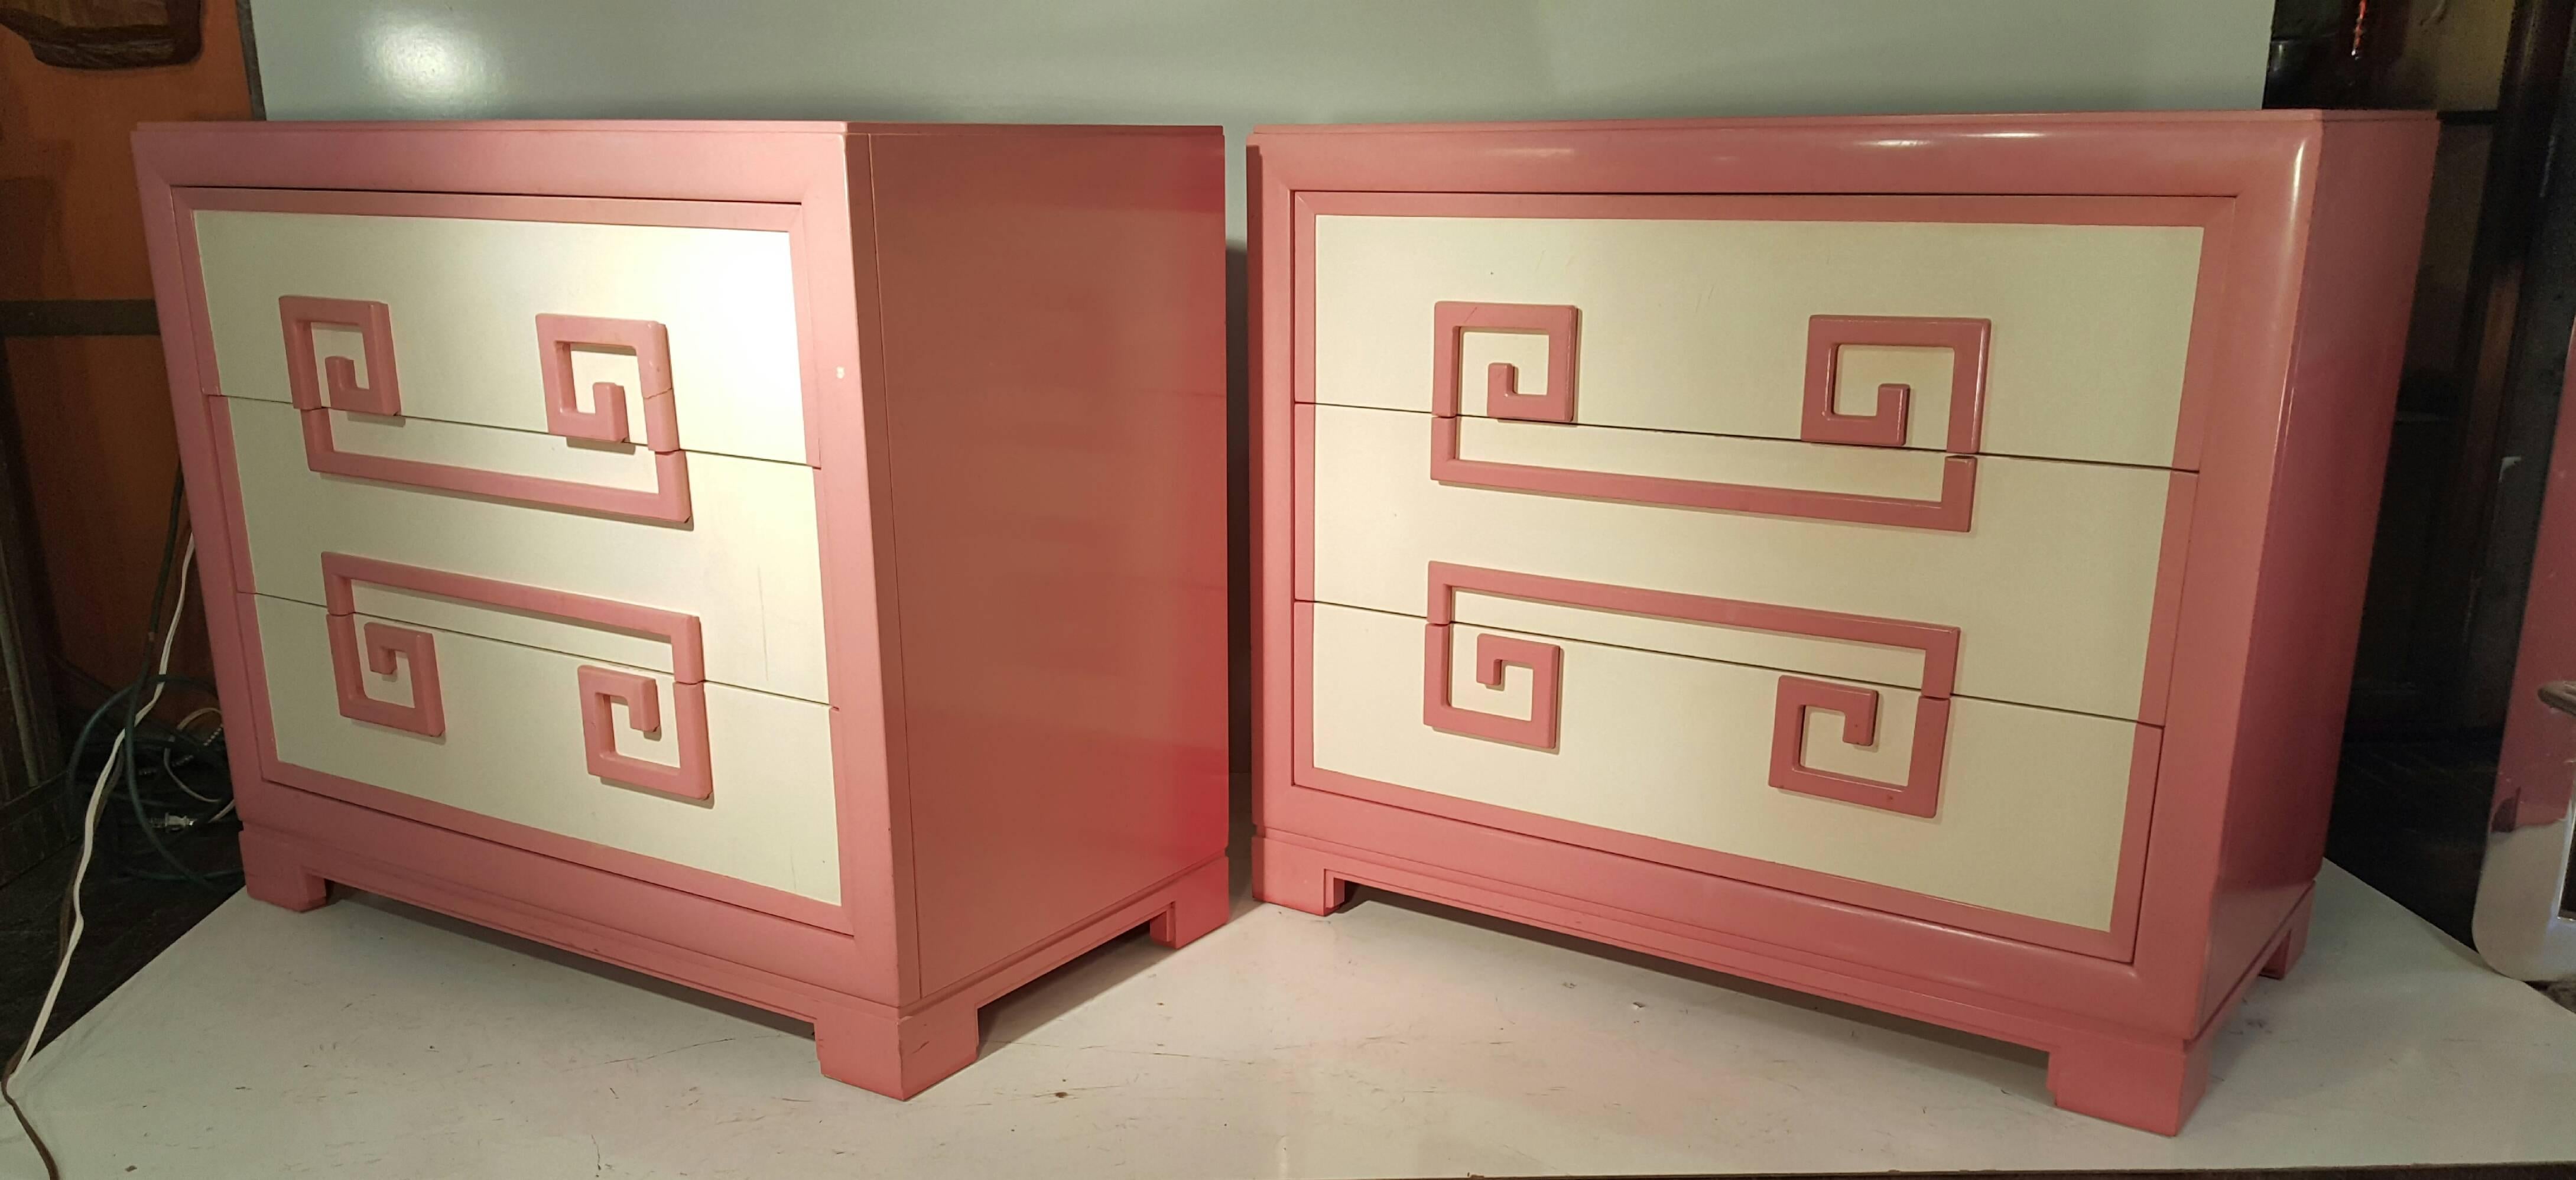 Pair of pink and white lacquered Greek key chests by Kittinger. Top drawers have sliding sock or jewelry compartments. Second drawers have adjustable dividers. Stunning design, exceptional quality.